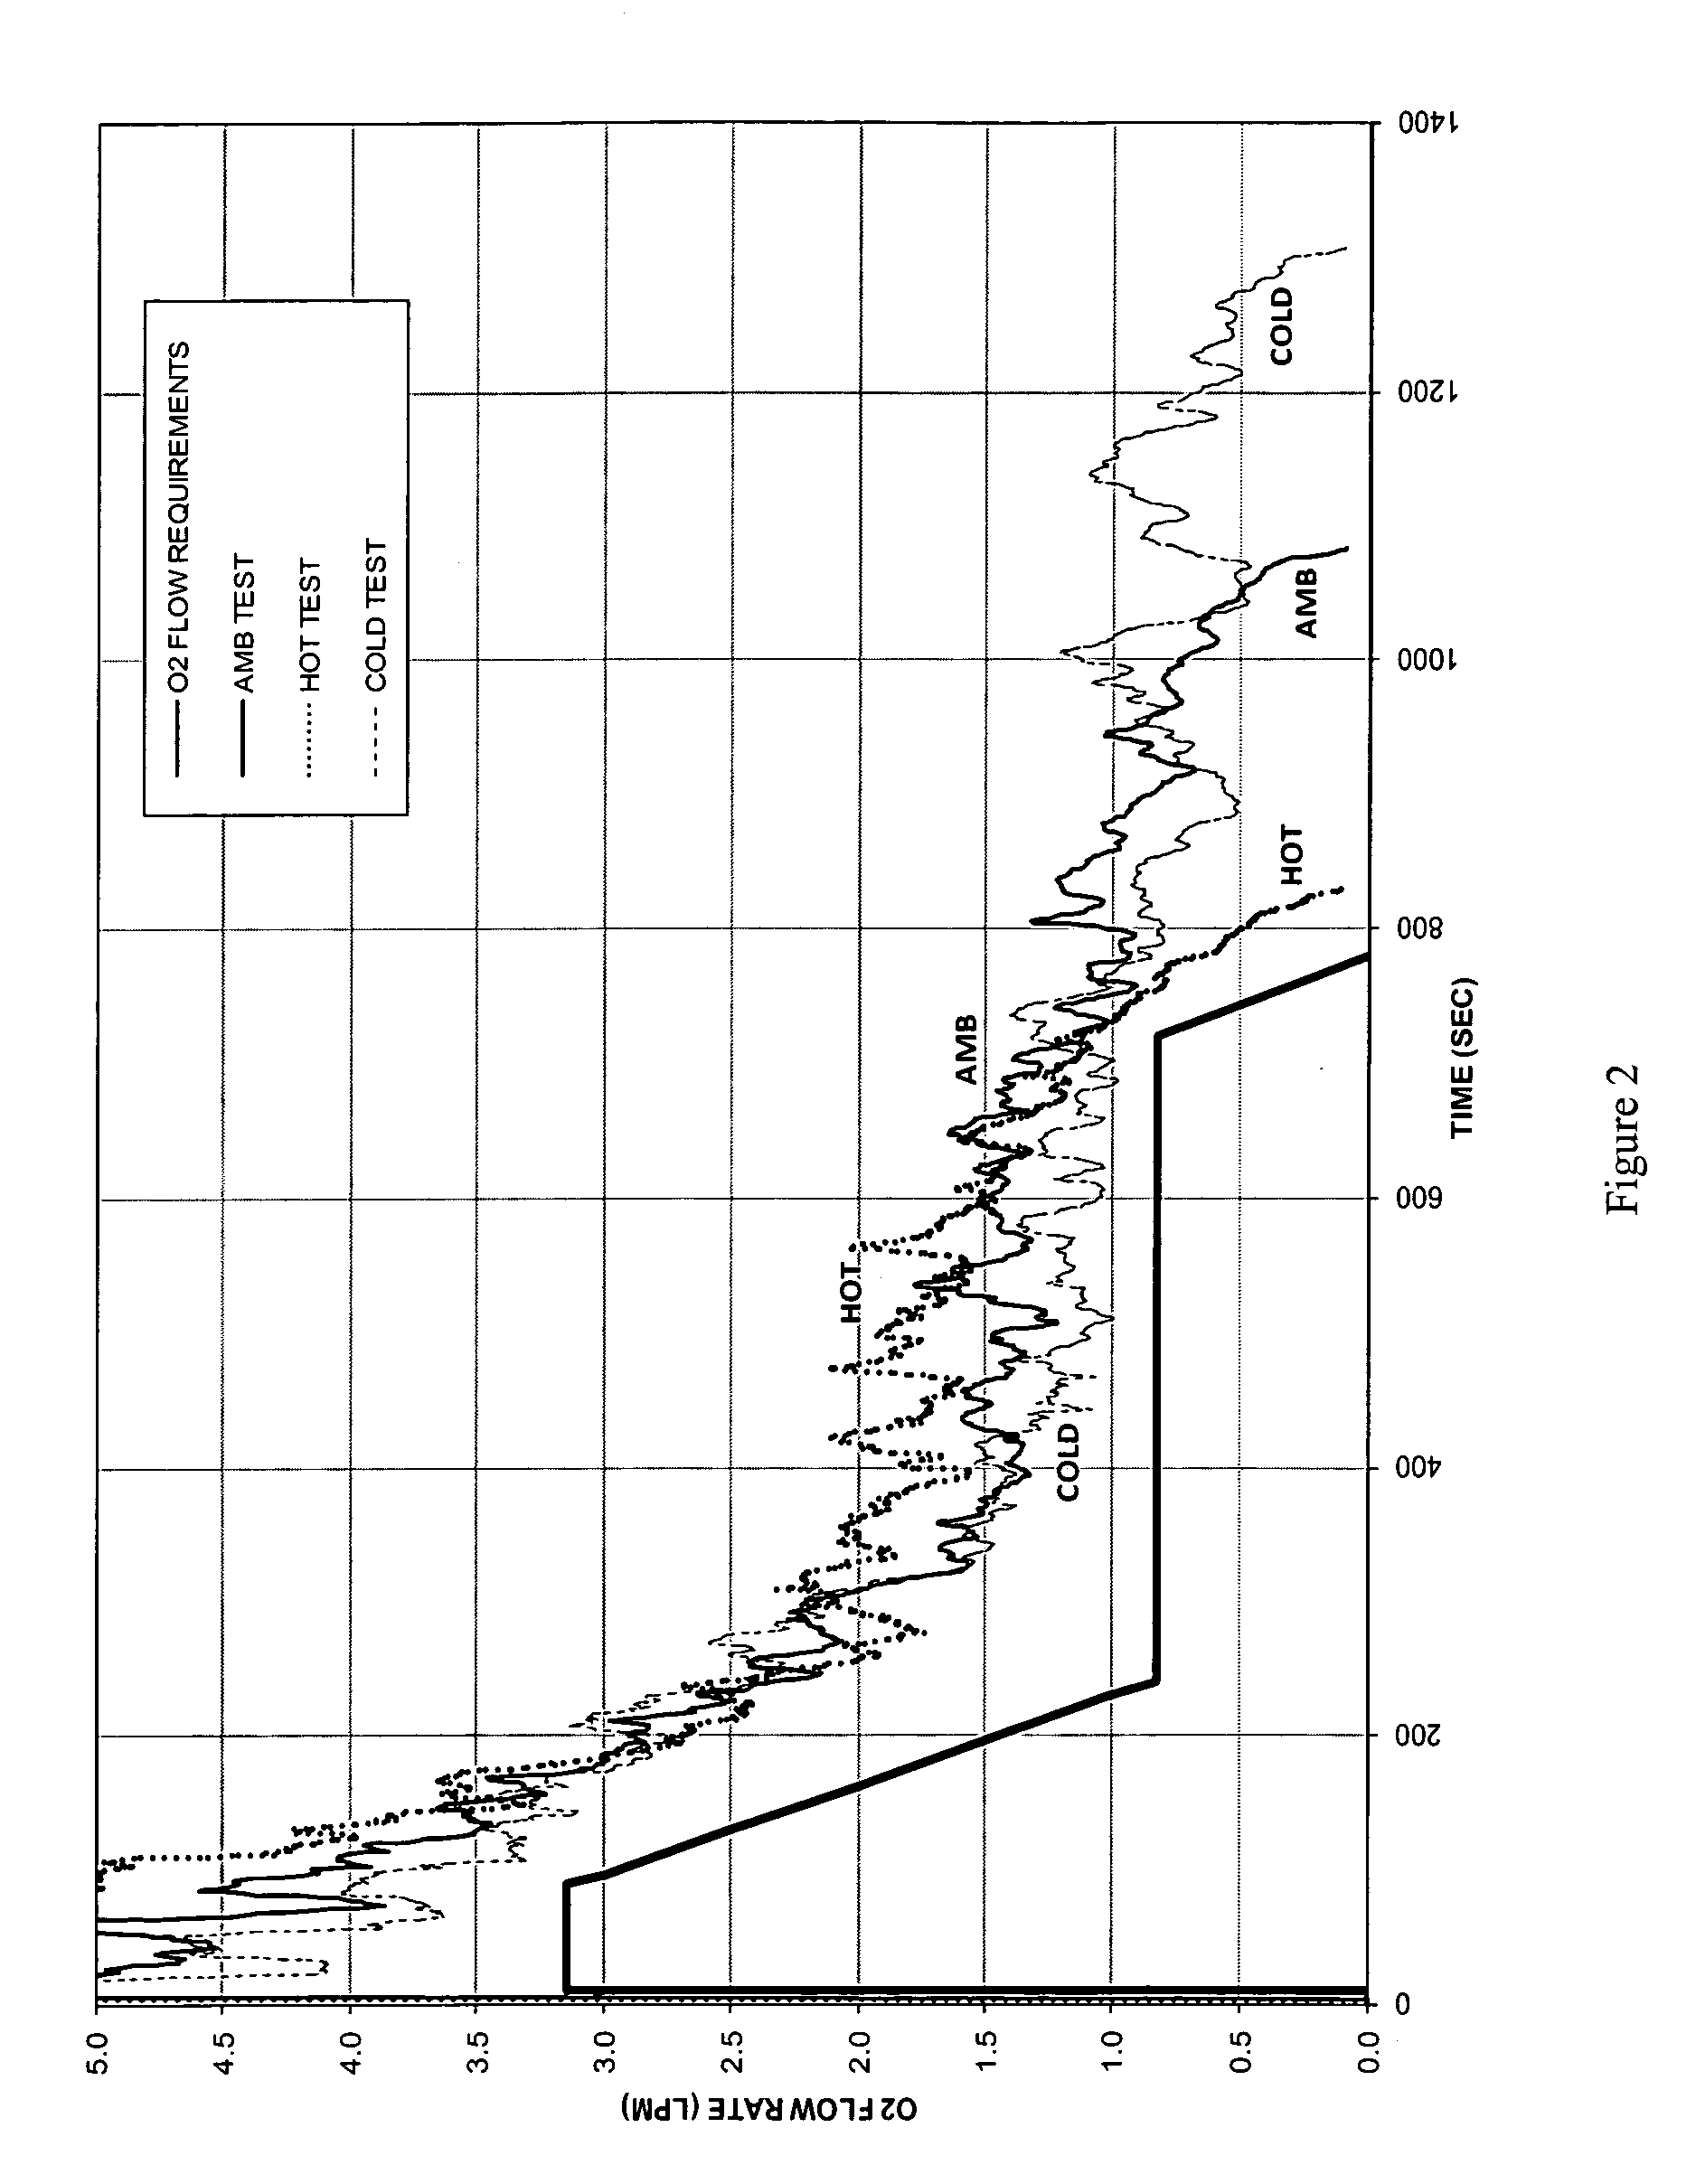 Oxygen generating composition